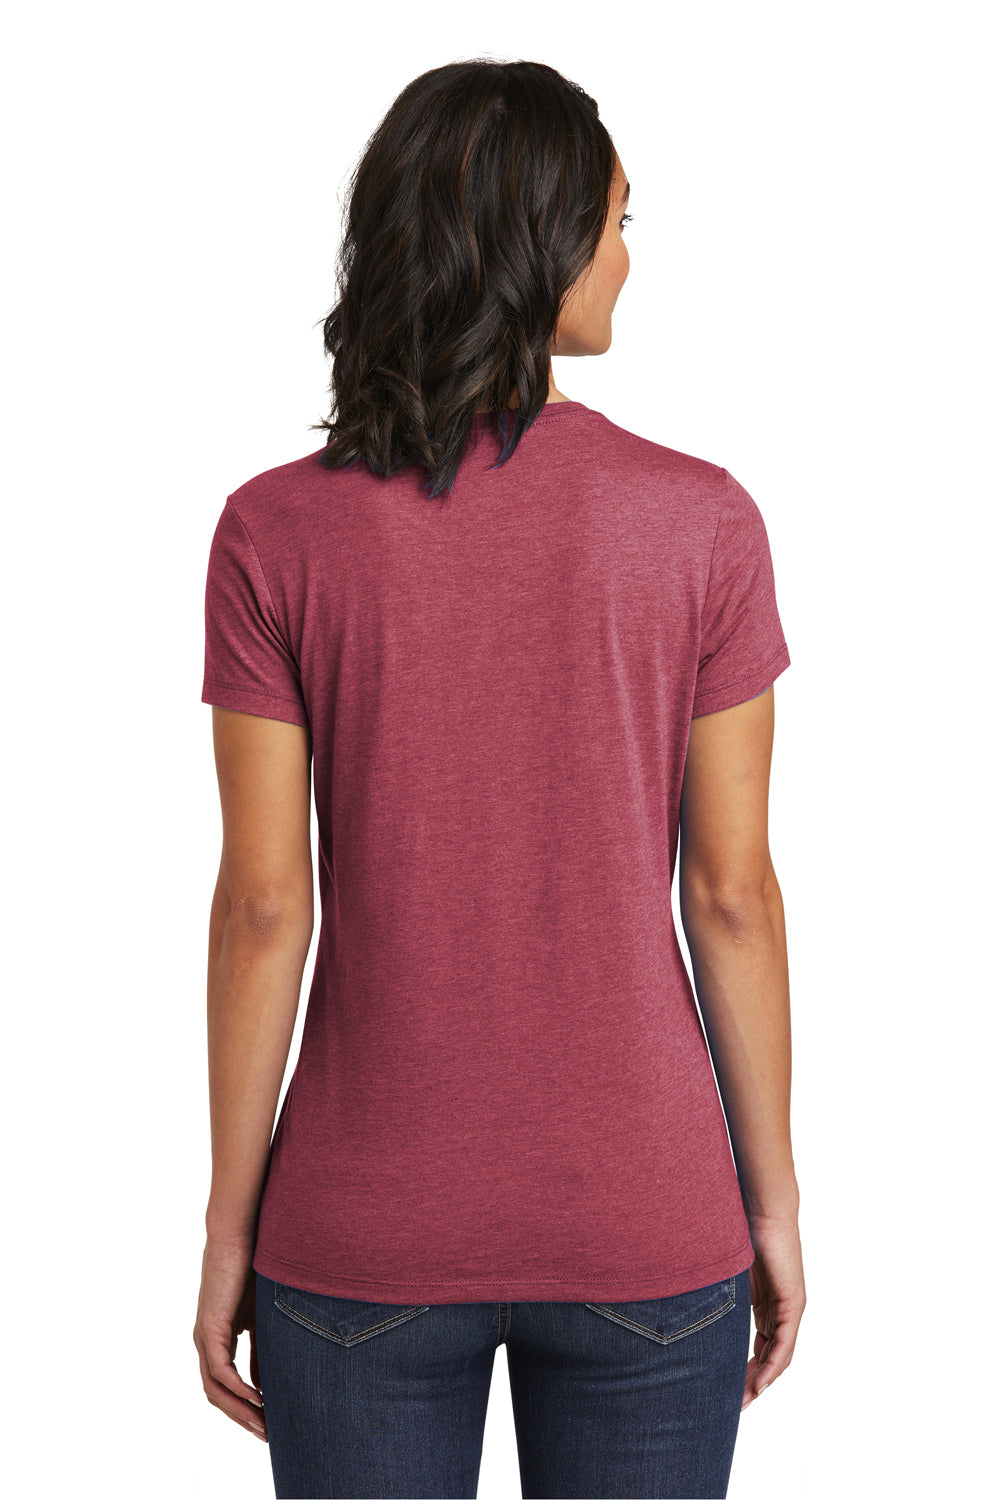 District DT6002 Womens Very Important Short Sleeve Crewneck T-Shirt Heather Cardinal Red Back